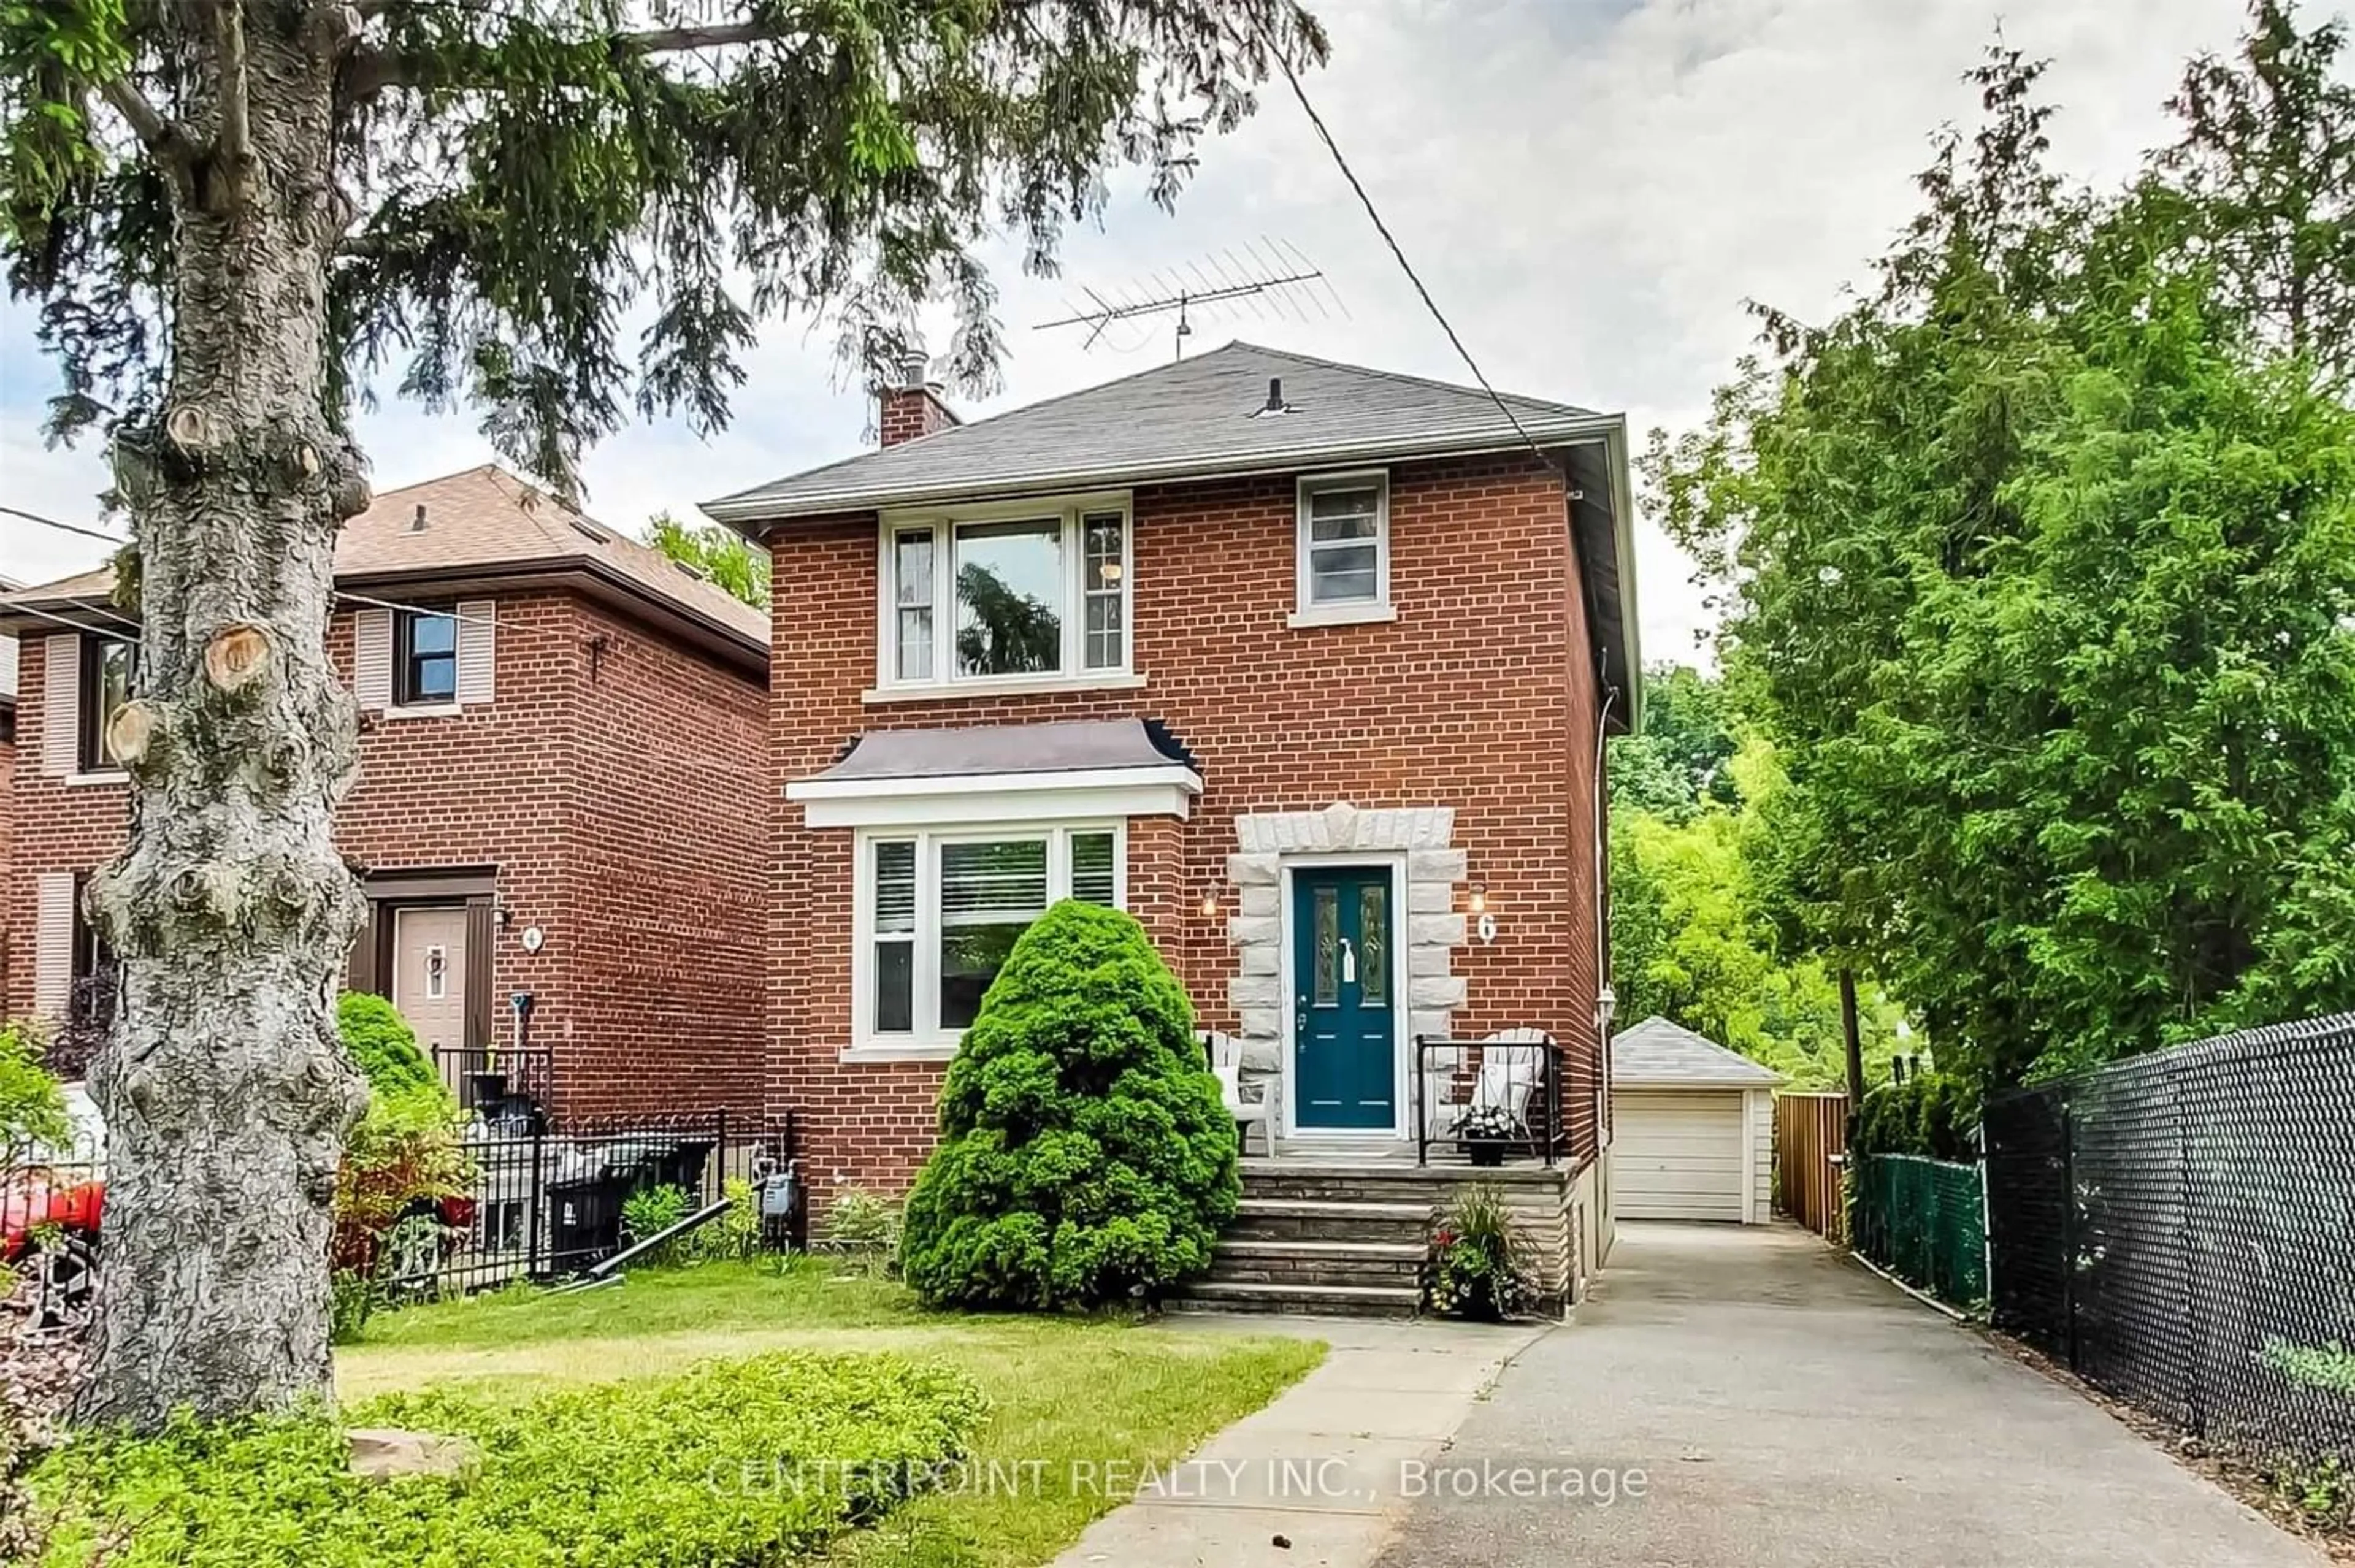 Home with brick exterior material for 6 Rolph Rd, Toronto Ontario M4G 3M4